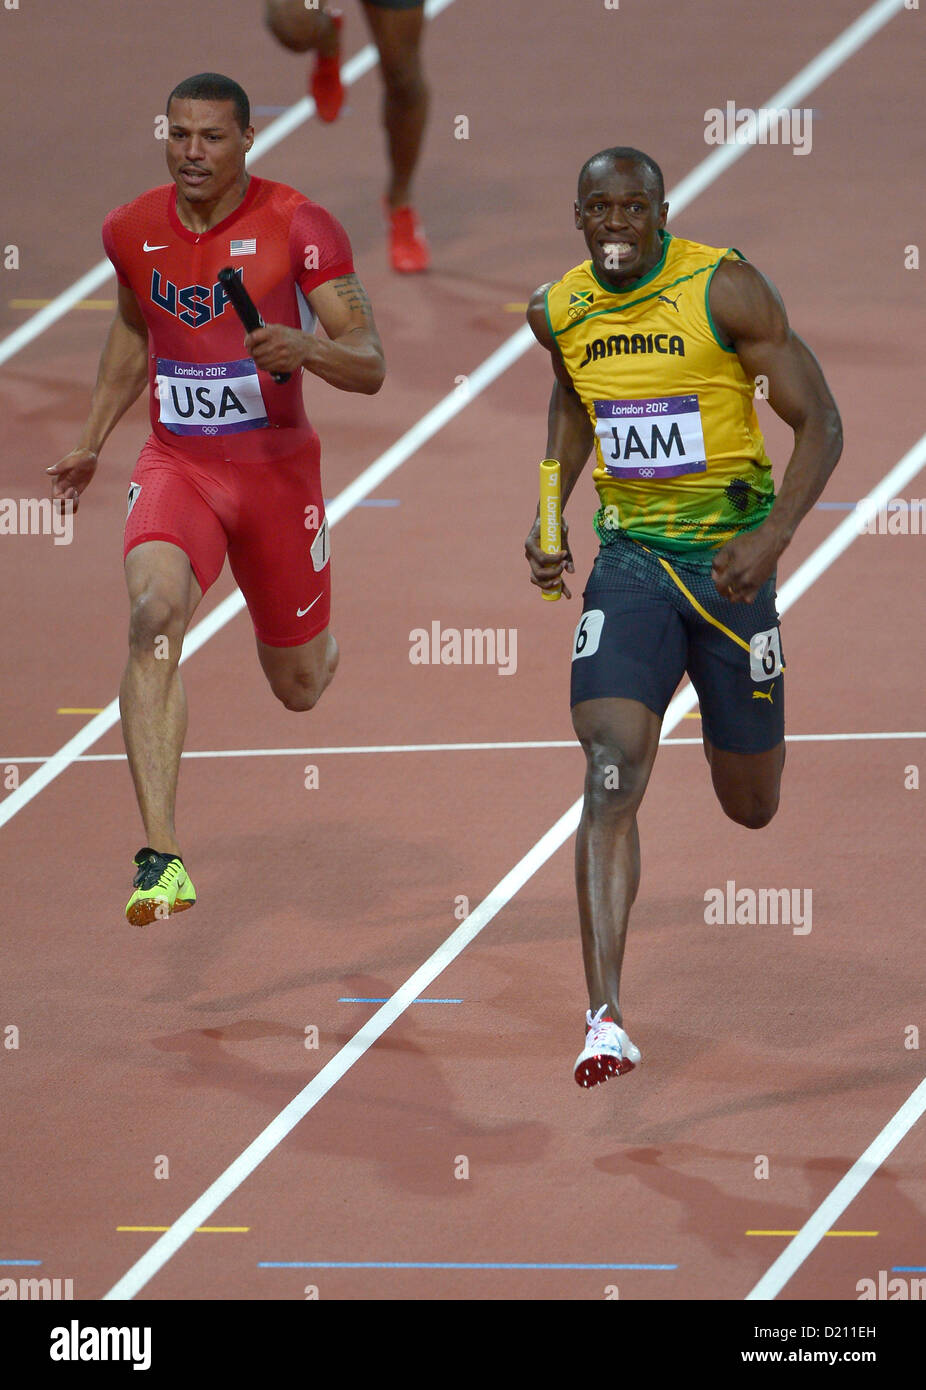 Jamaica's Usain Bolt (right) battles it out with USA's Ryan Bailey. Athletics Stock Photo